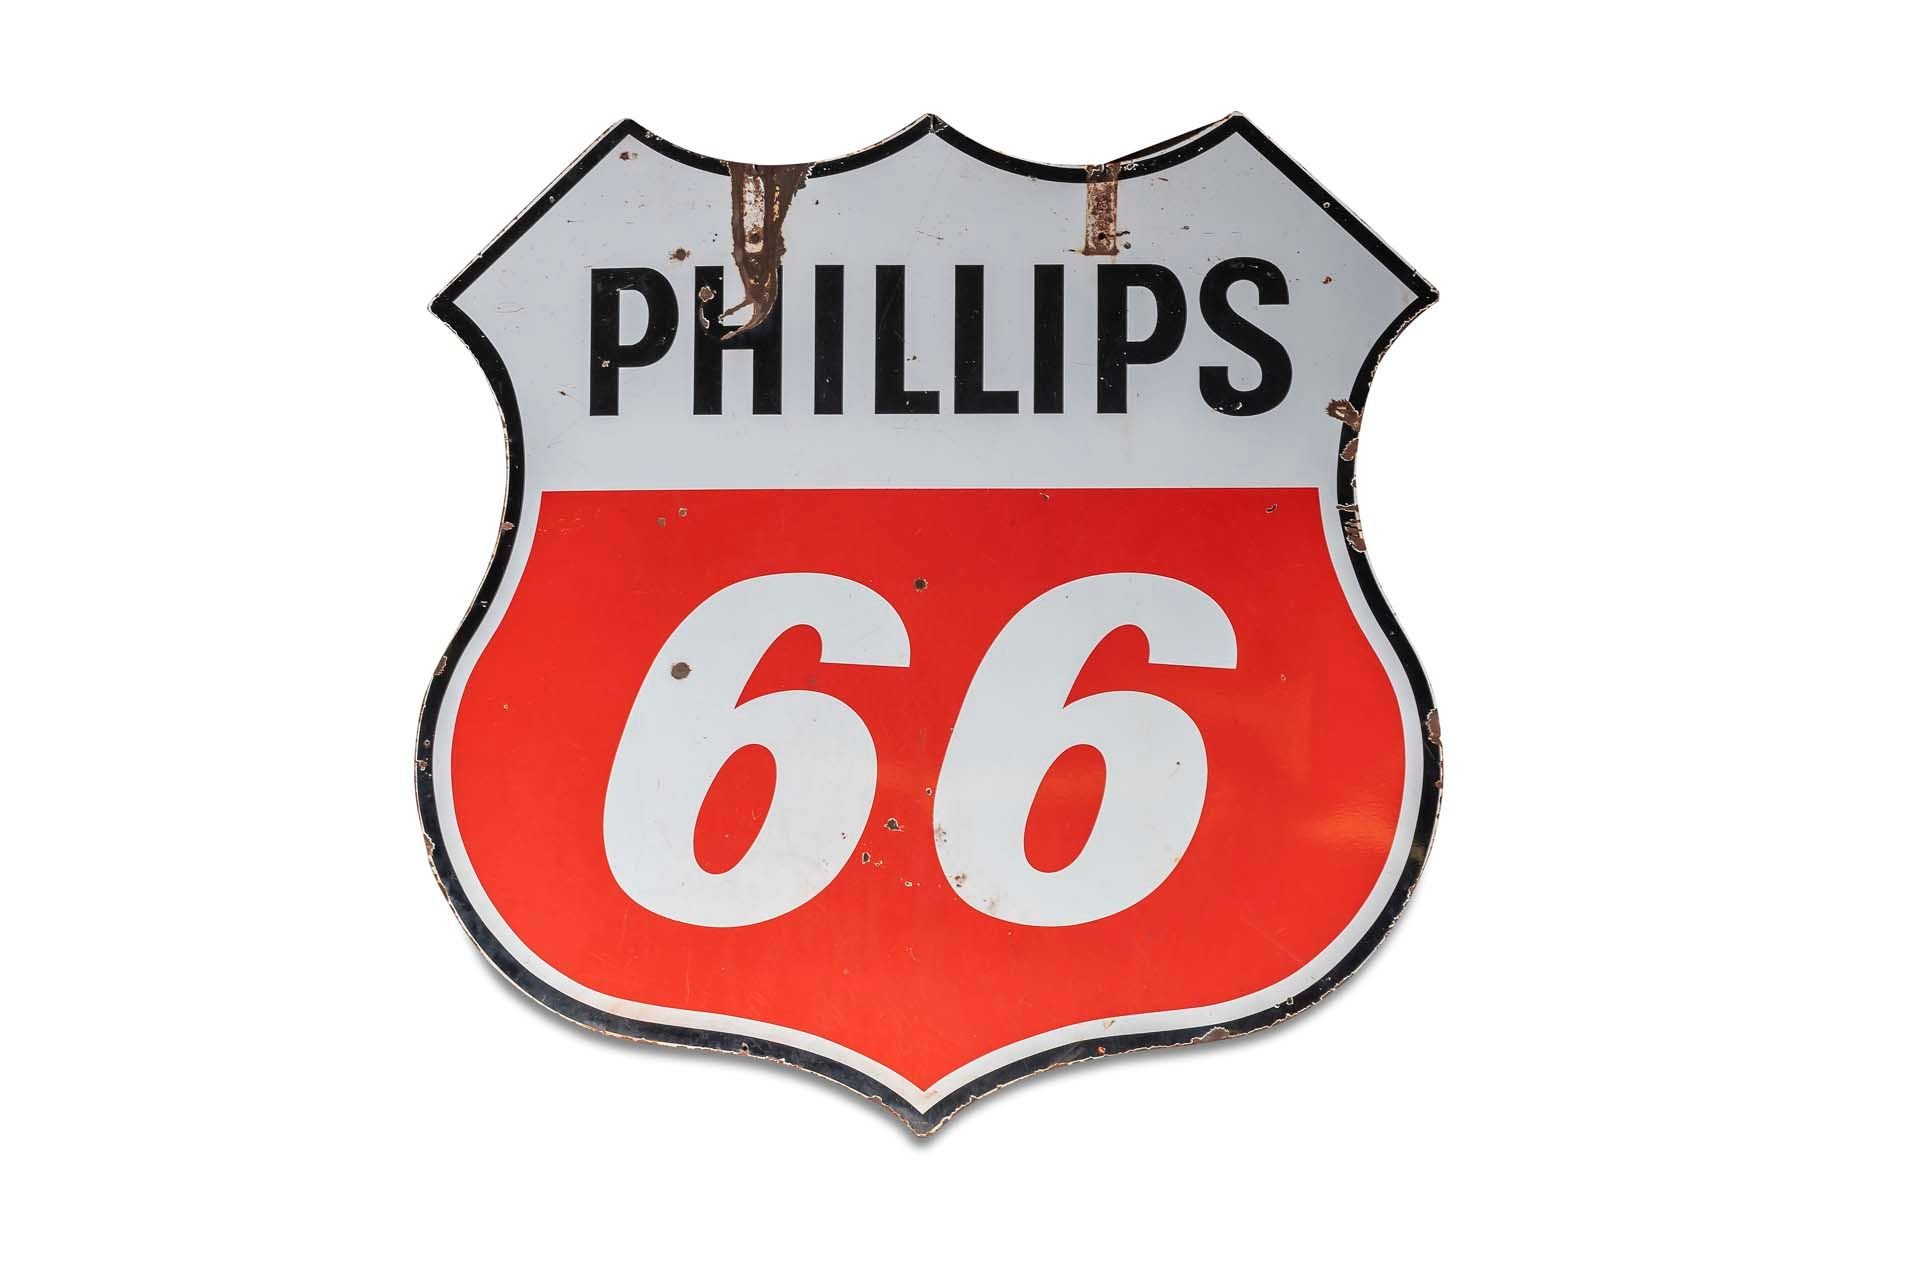 For Sale Very large 'Phillips 66 Porcelain Sign